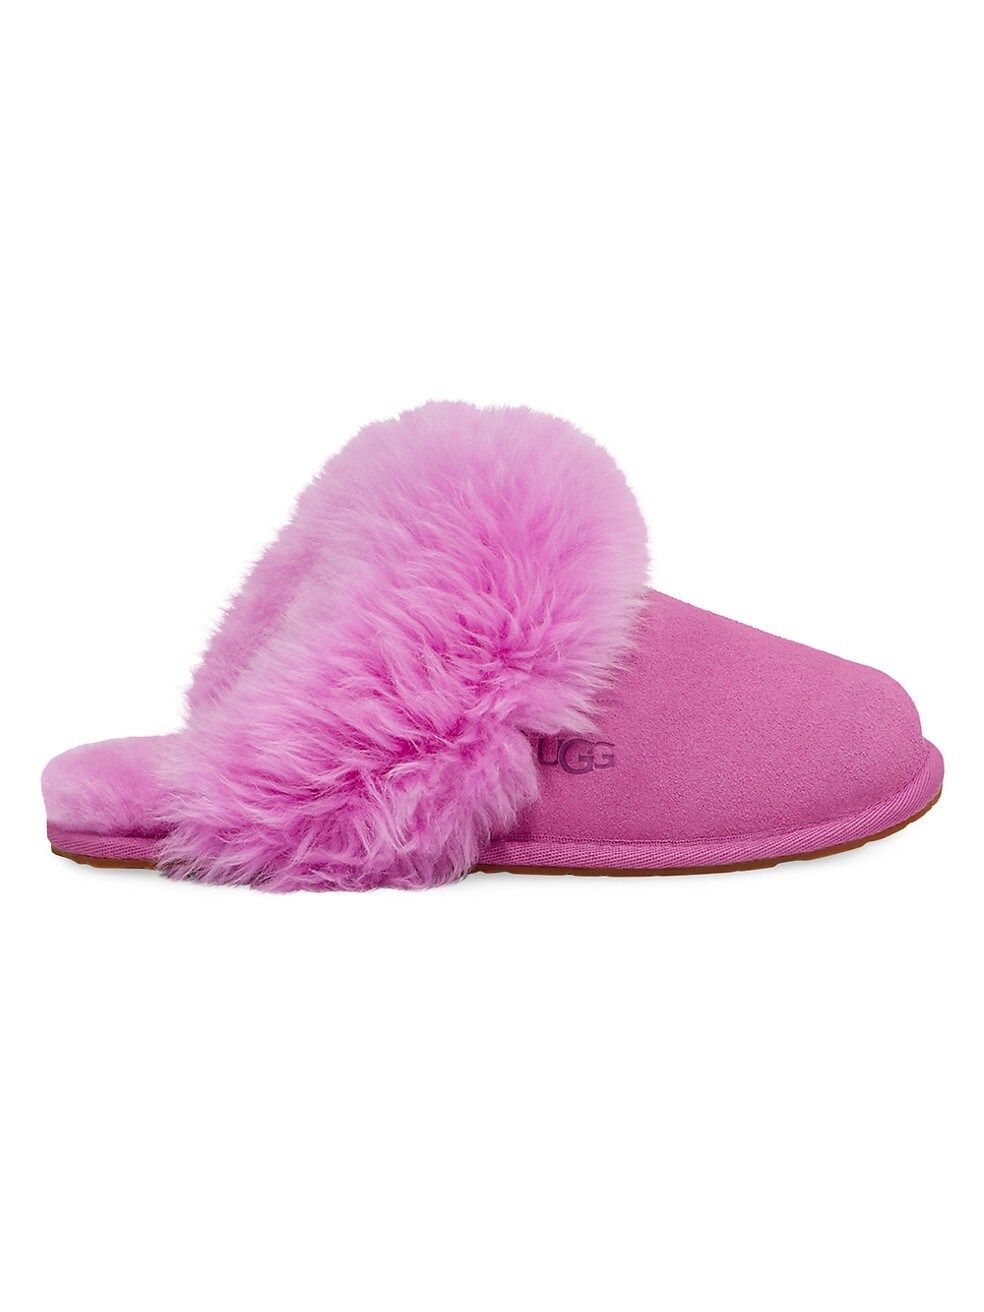 UGG Scuff Sis Dyed Sheepskin Slippers | Saks Fifth Avenue